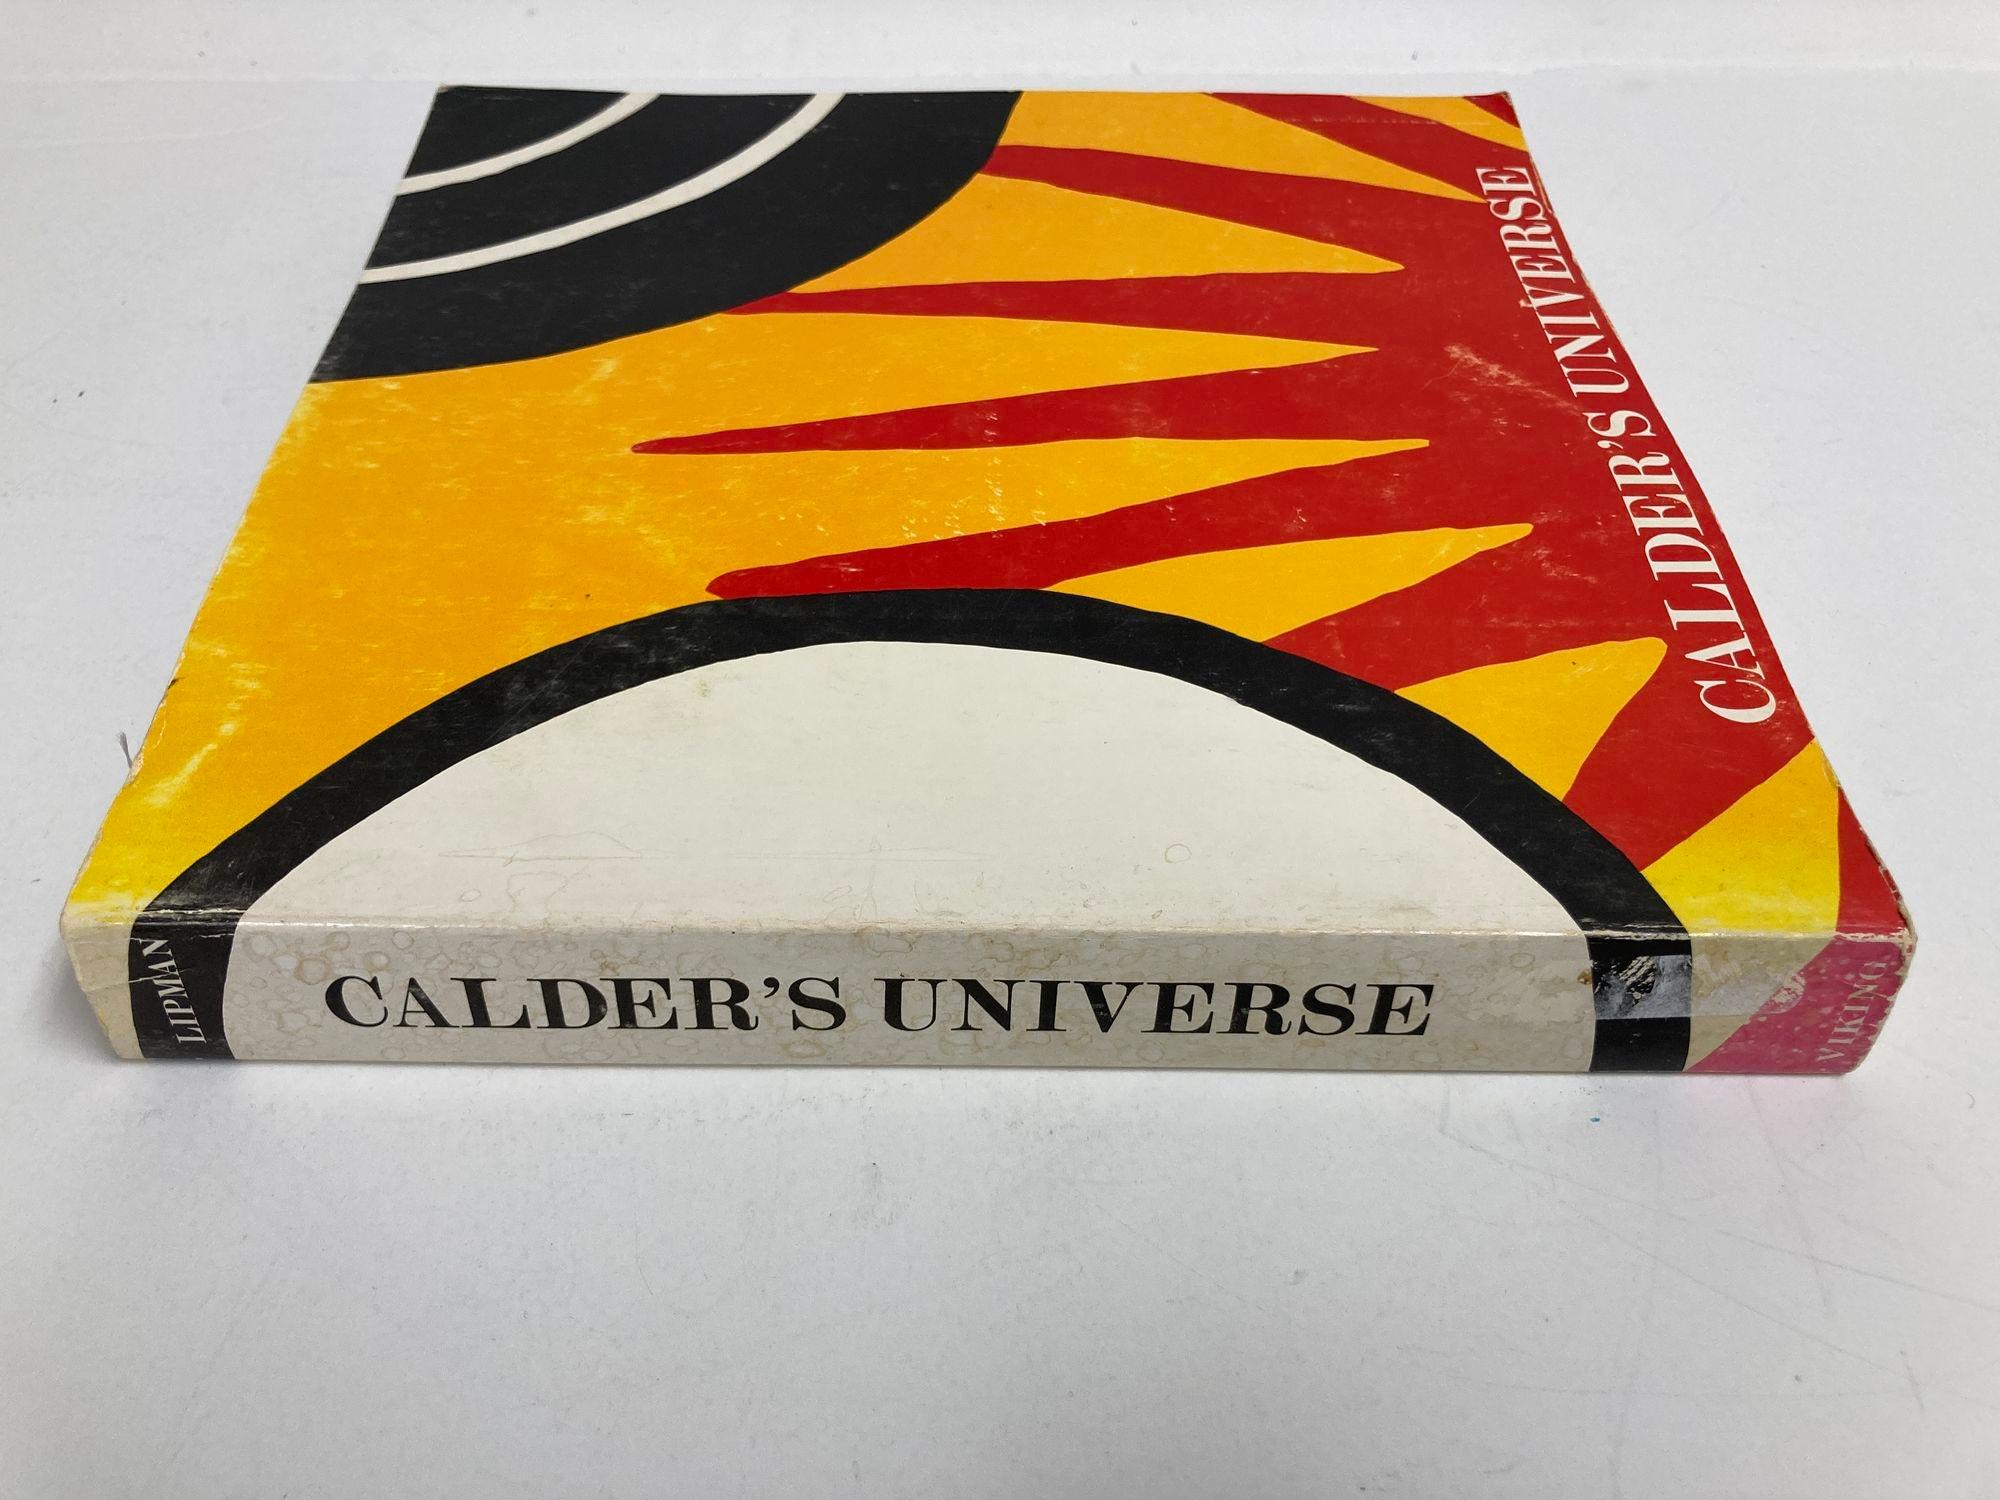 Vintage Calder's Universe by Jean Lipman Book 1st Ed 1976.
Vintage Calder's Universe Book by Jean Lipman.
1st Edition 1976.
The definitive book on Alexander Calder's life and work. Stunning photographs, illustrations, and fascinating text